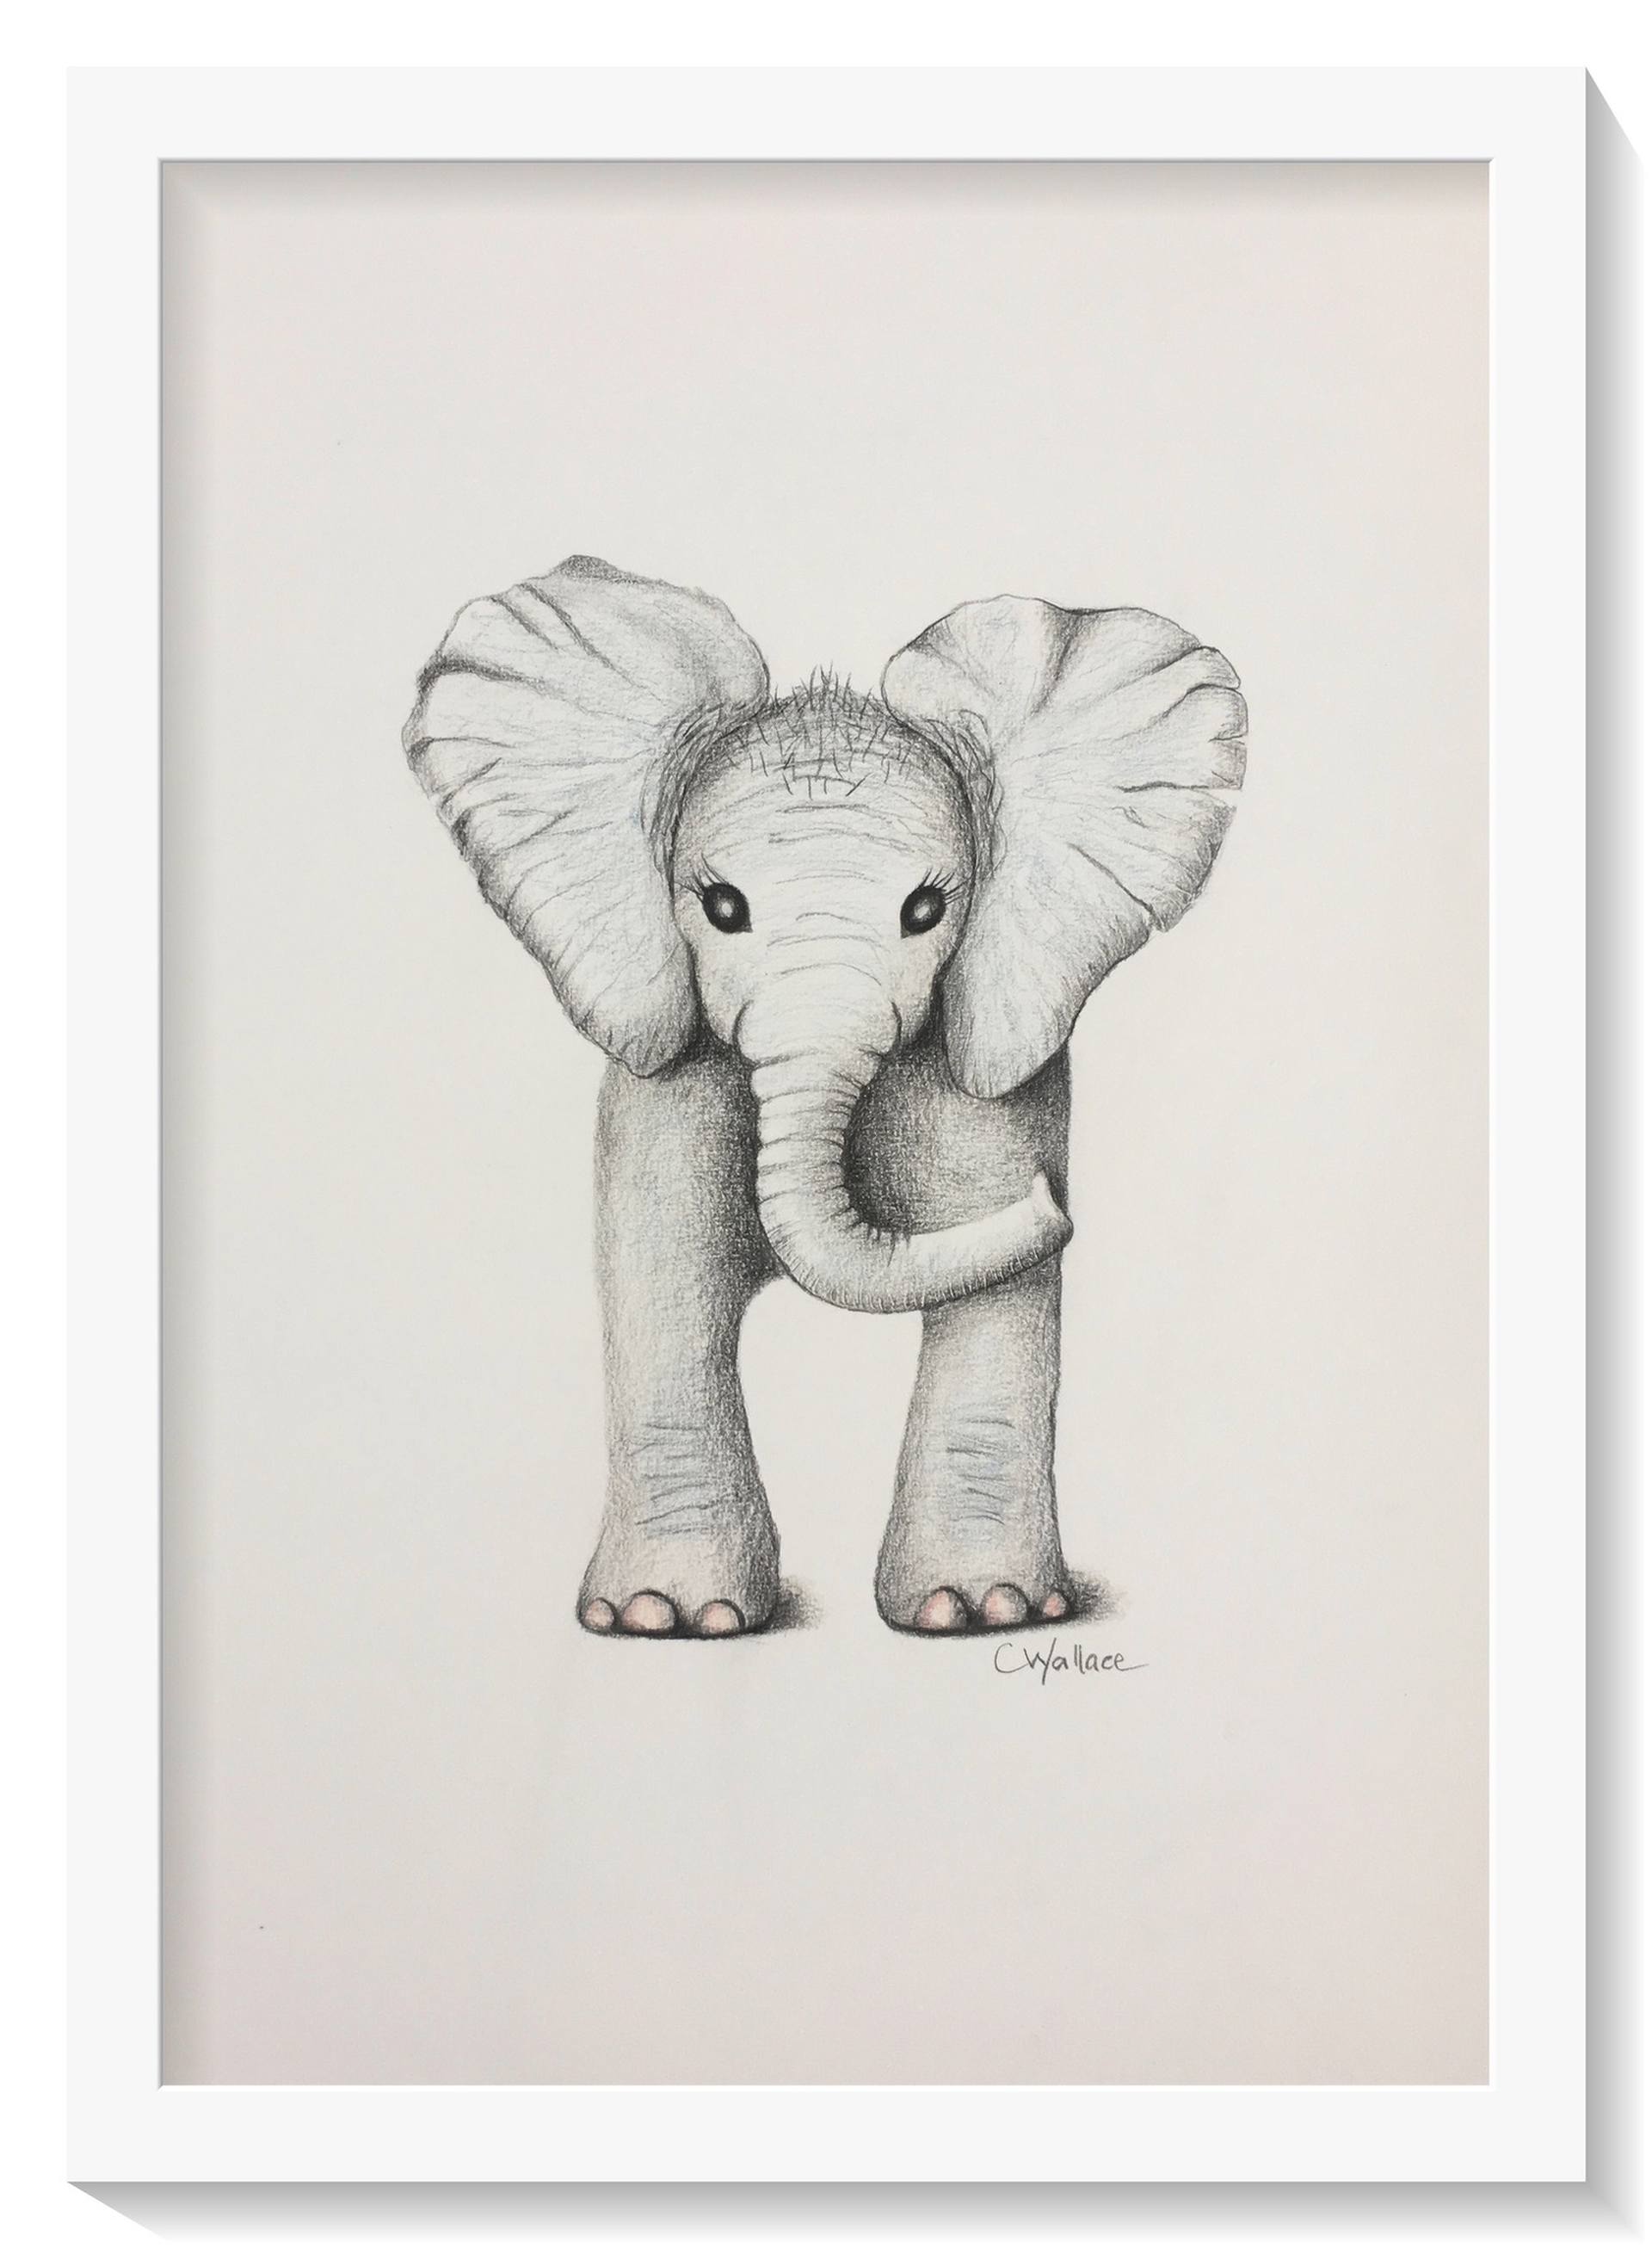 Cute Baby Elephant Drawing by Catherine Wallace | Saatchi Art-saigonsouth.com.vn